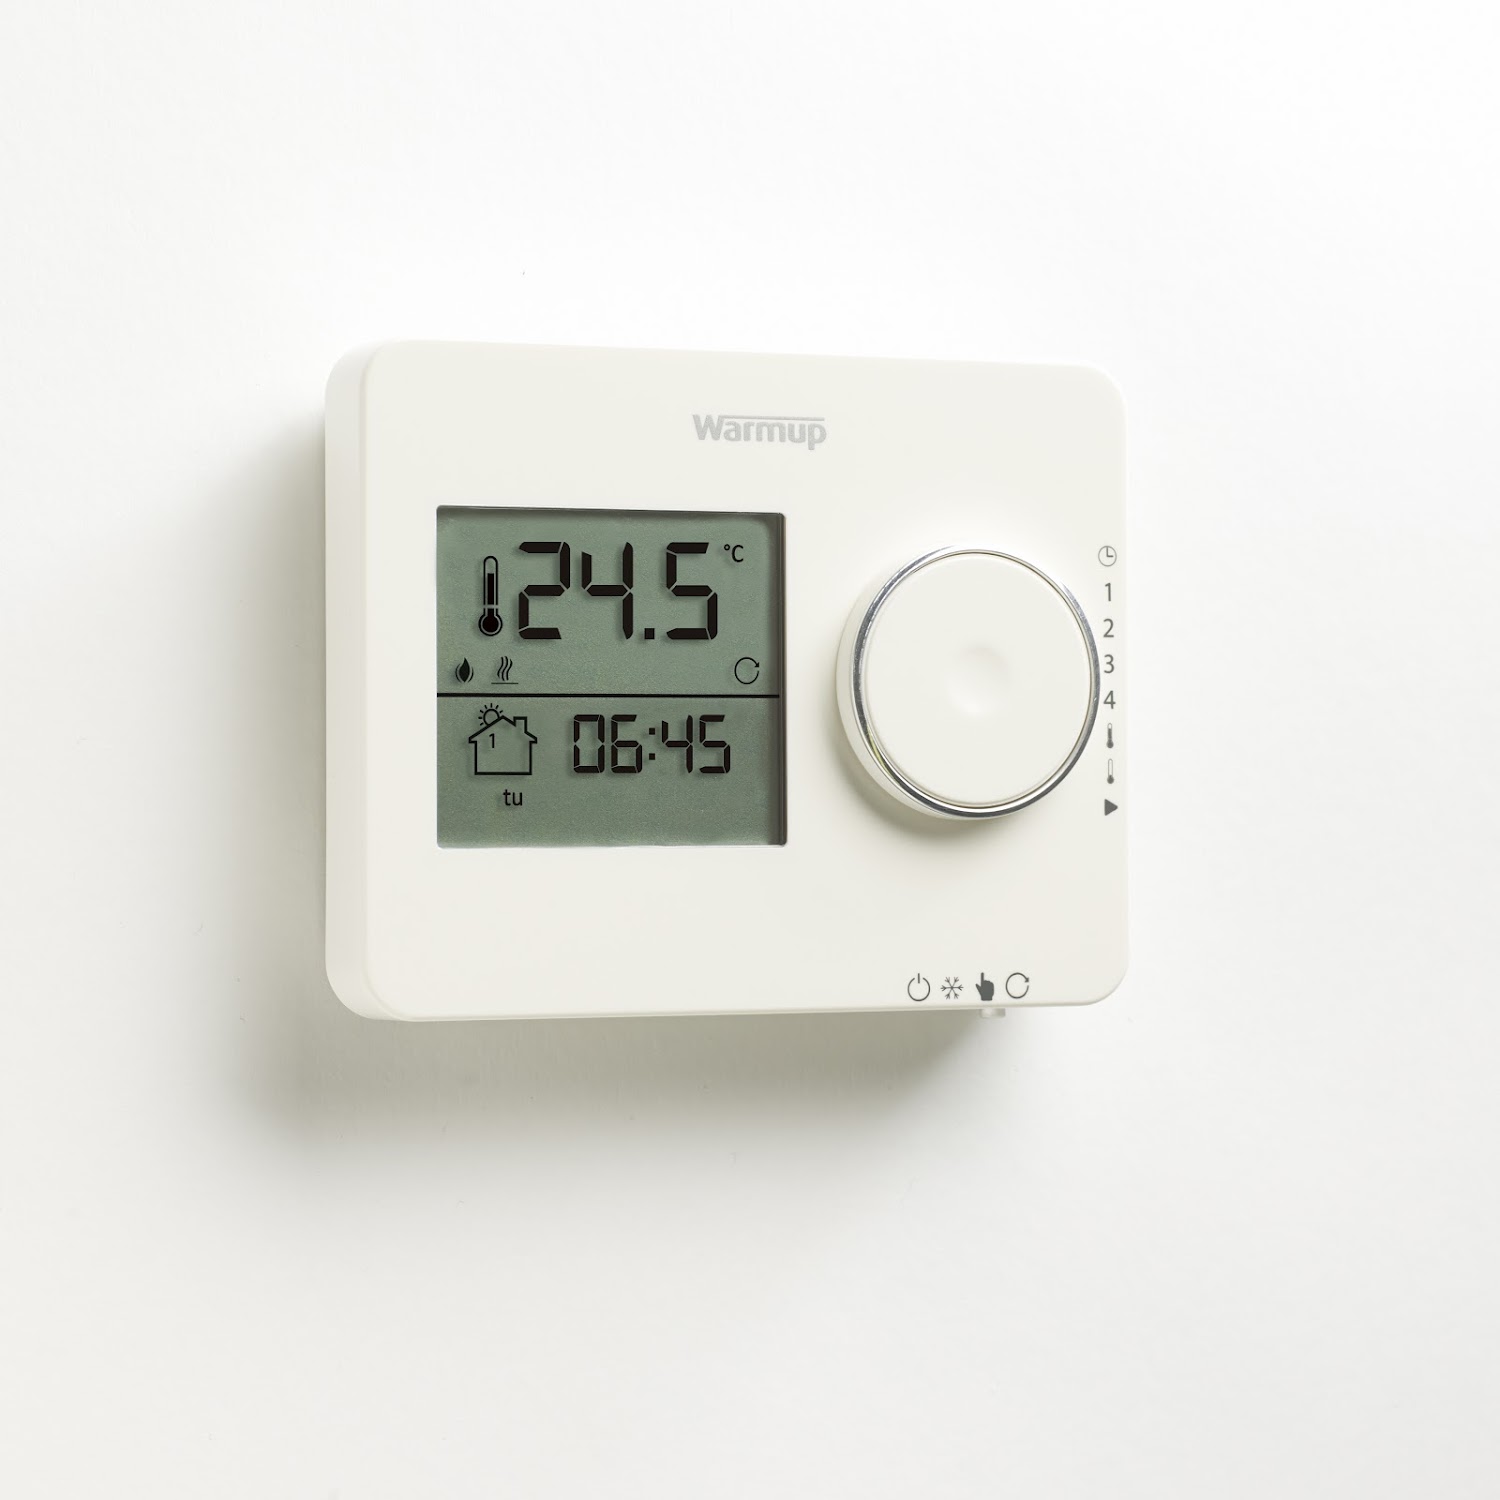 Warmup Manual Control Thermostat Programme Controller Underfloor Heating Wh...